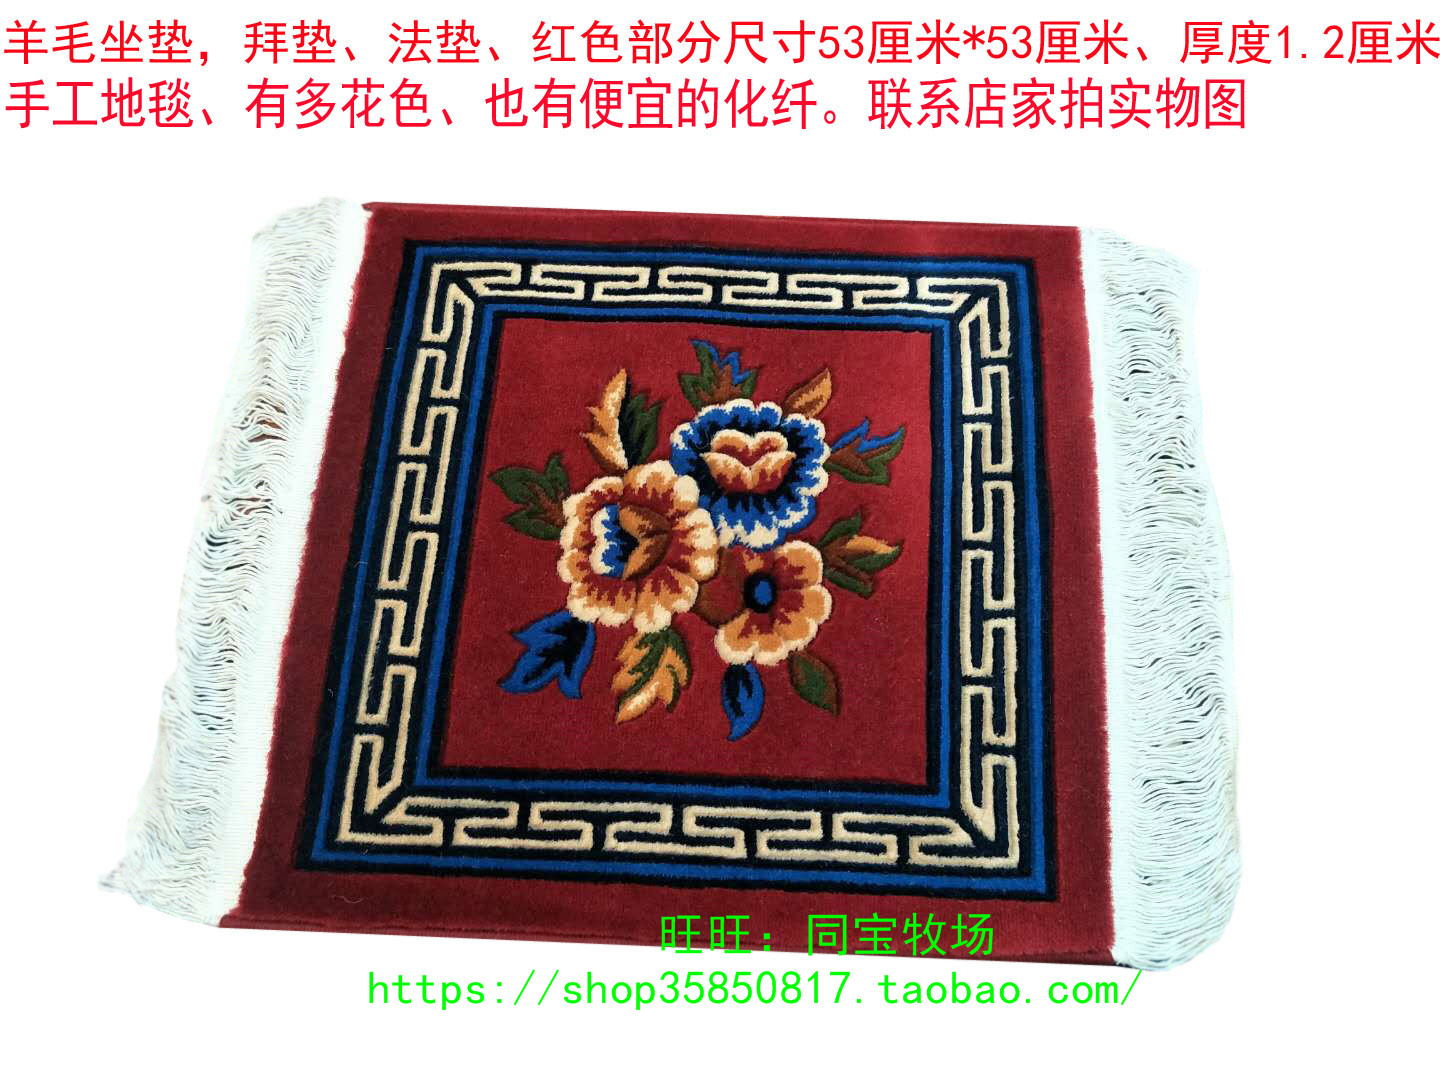 Wool Baie cushion Blanket Carpet Method Cushion Flower with a few contact Shop Home for physical photos